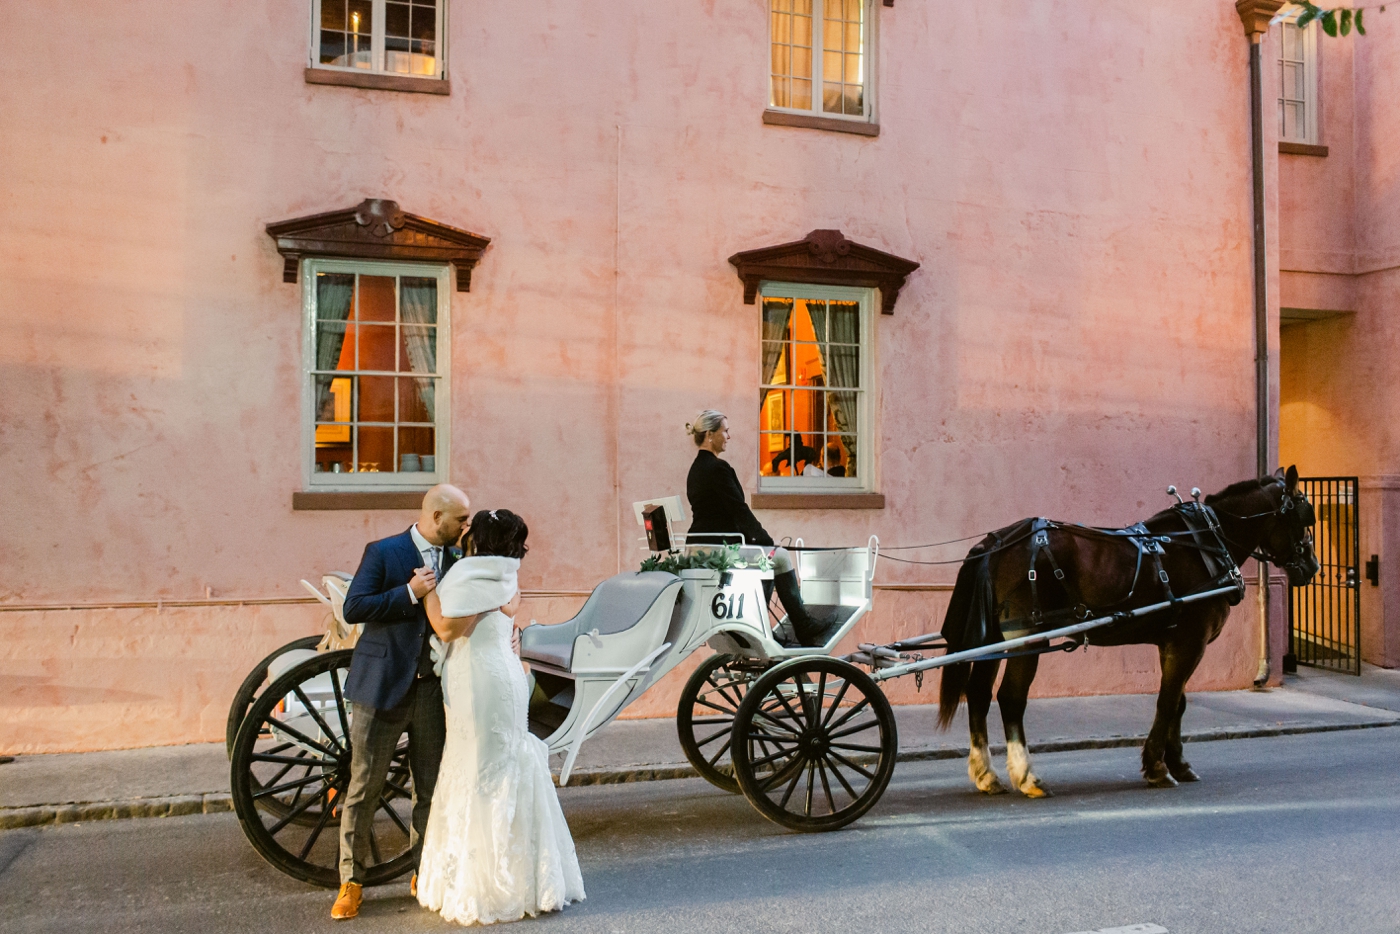 Wedding elopement reception at The Olde Pink House in Savannah